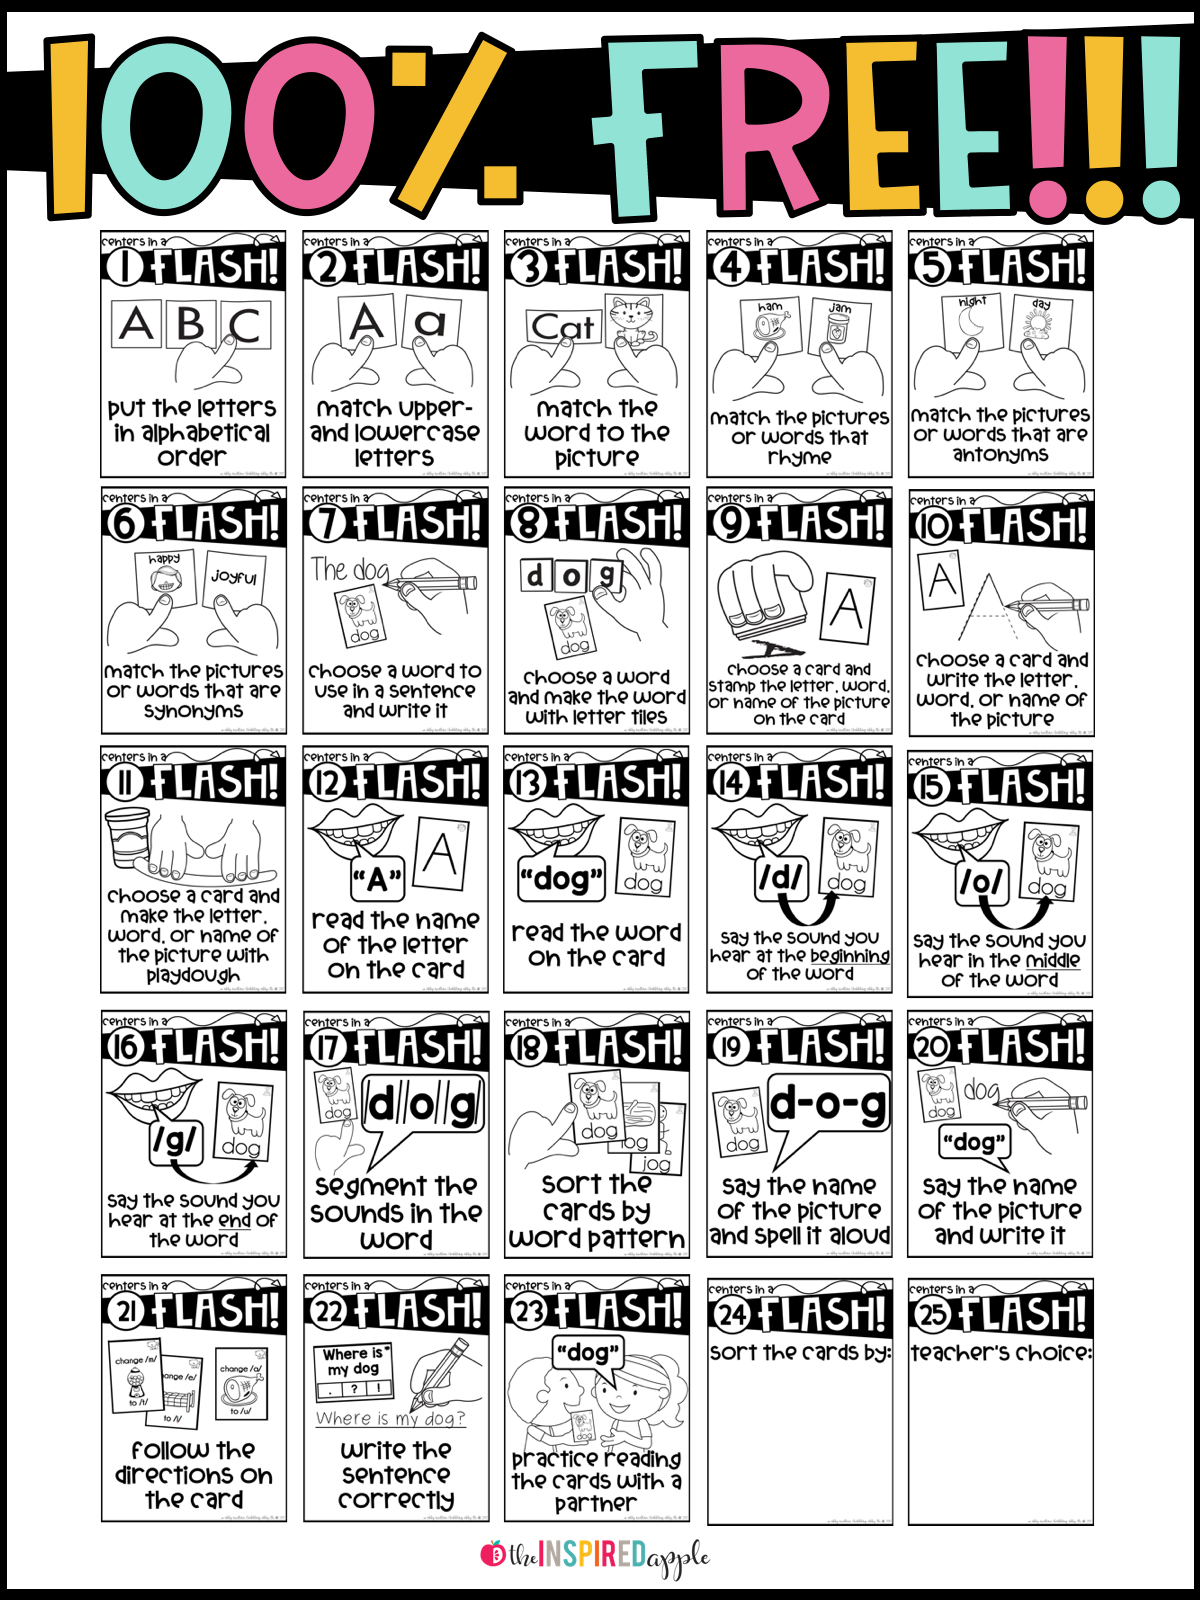 This is a set of 25 no-prep literacy centers activity posters. These were designed to compliment Kindergarten in a Flash and First Grade in a Flash flashcard sets, though you can use them with existing flashcards you already own OR you can easily use index cards to create your own flashcards specific to your curriculum. They're perfect for preschool, kindergarten, and first grade students and can easily be incorporated into you daily center rotations, small group activities, or ELA curriculum. The targeted skills include phonemic awareness, letter identification, letter-sound correspondence, writing, grammar, word families, vowel teams, r-controlled vowels, digraphs, diphthongs, homophones, antonyms, synonyms, and more!